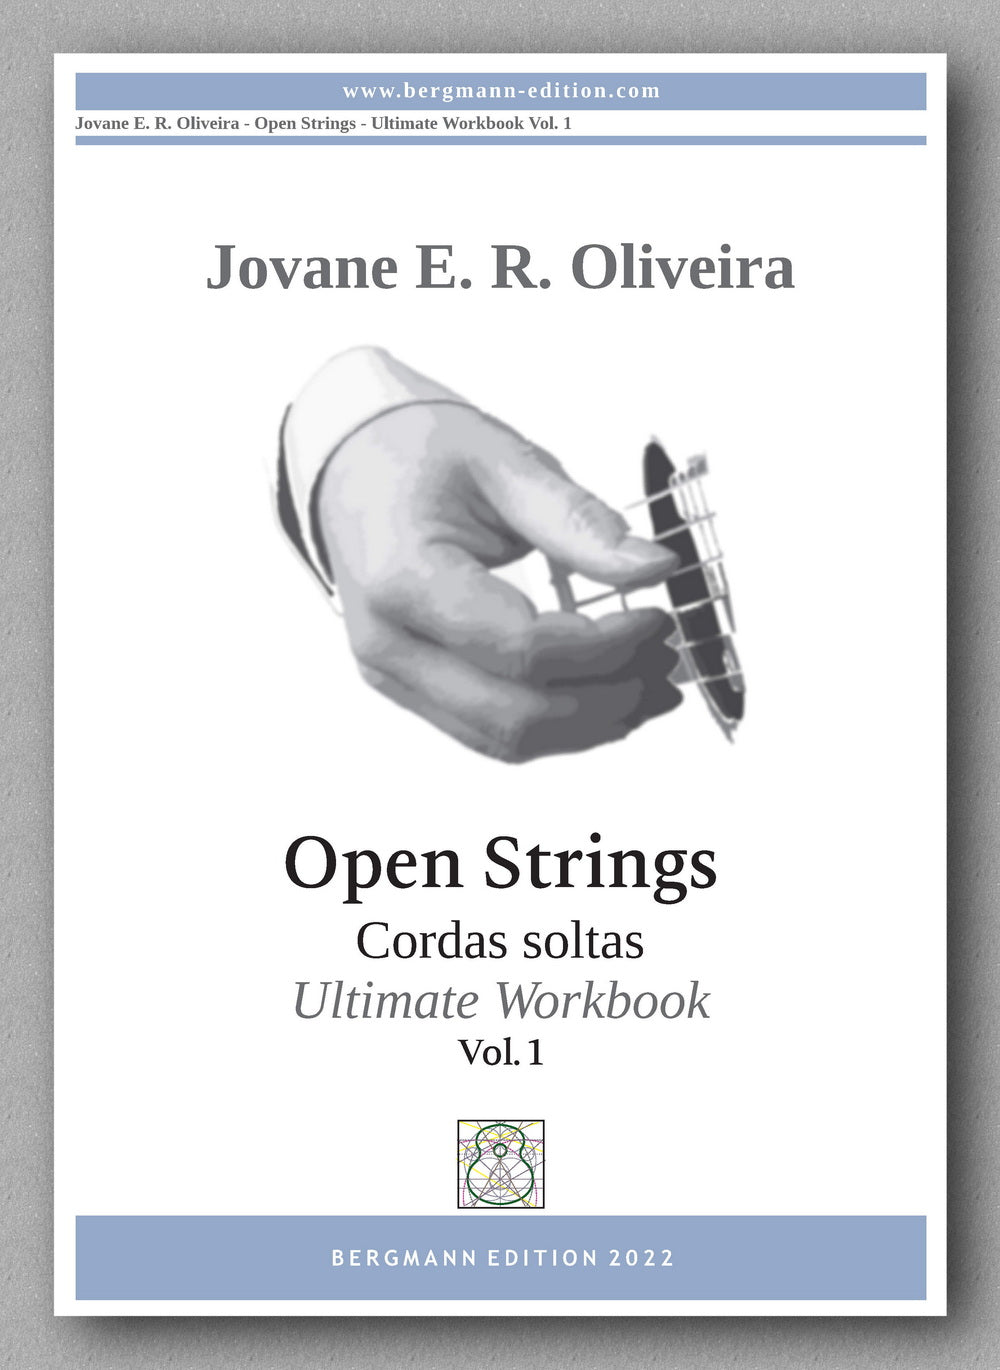 Open Strings by Jovane E.R. Oliveira - preview of the cover